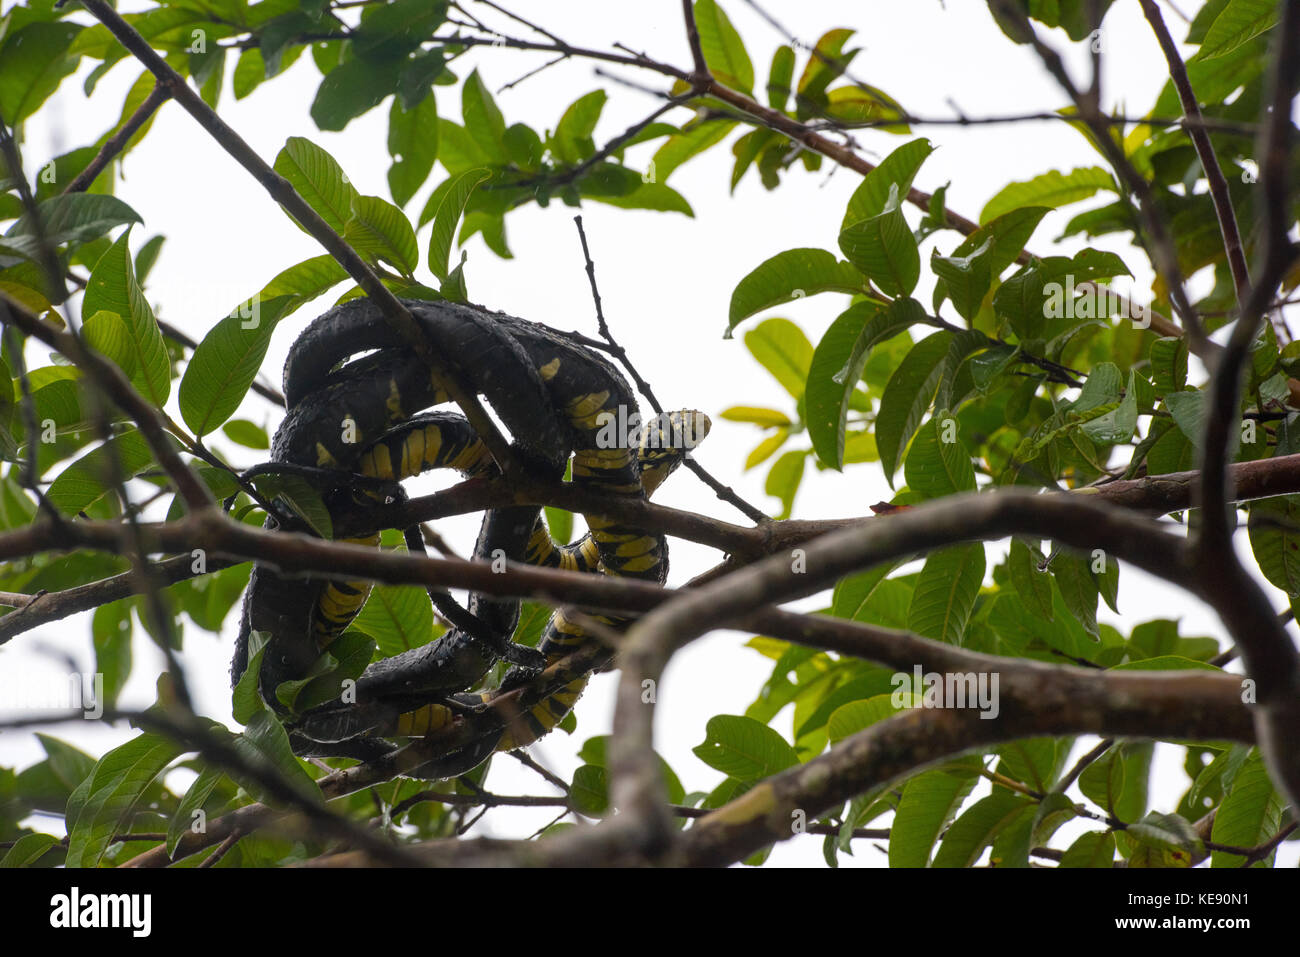 Tiger Rat Snake coiled in branches, Arenal, Costa Rica Stock Photo